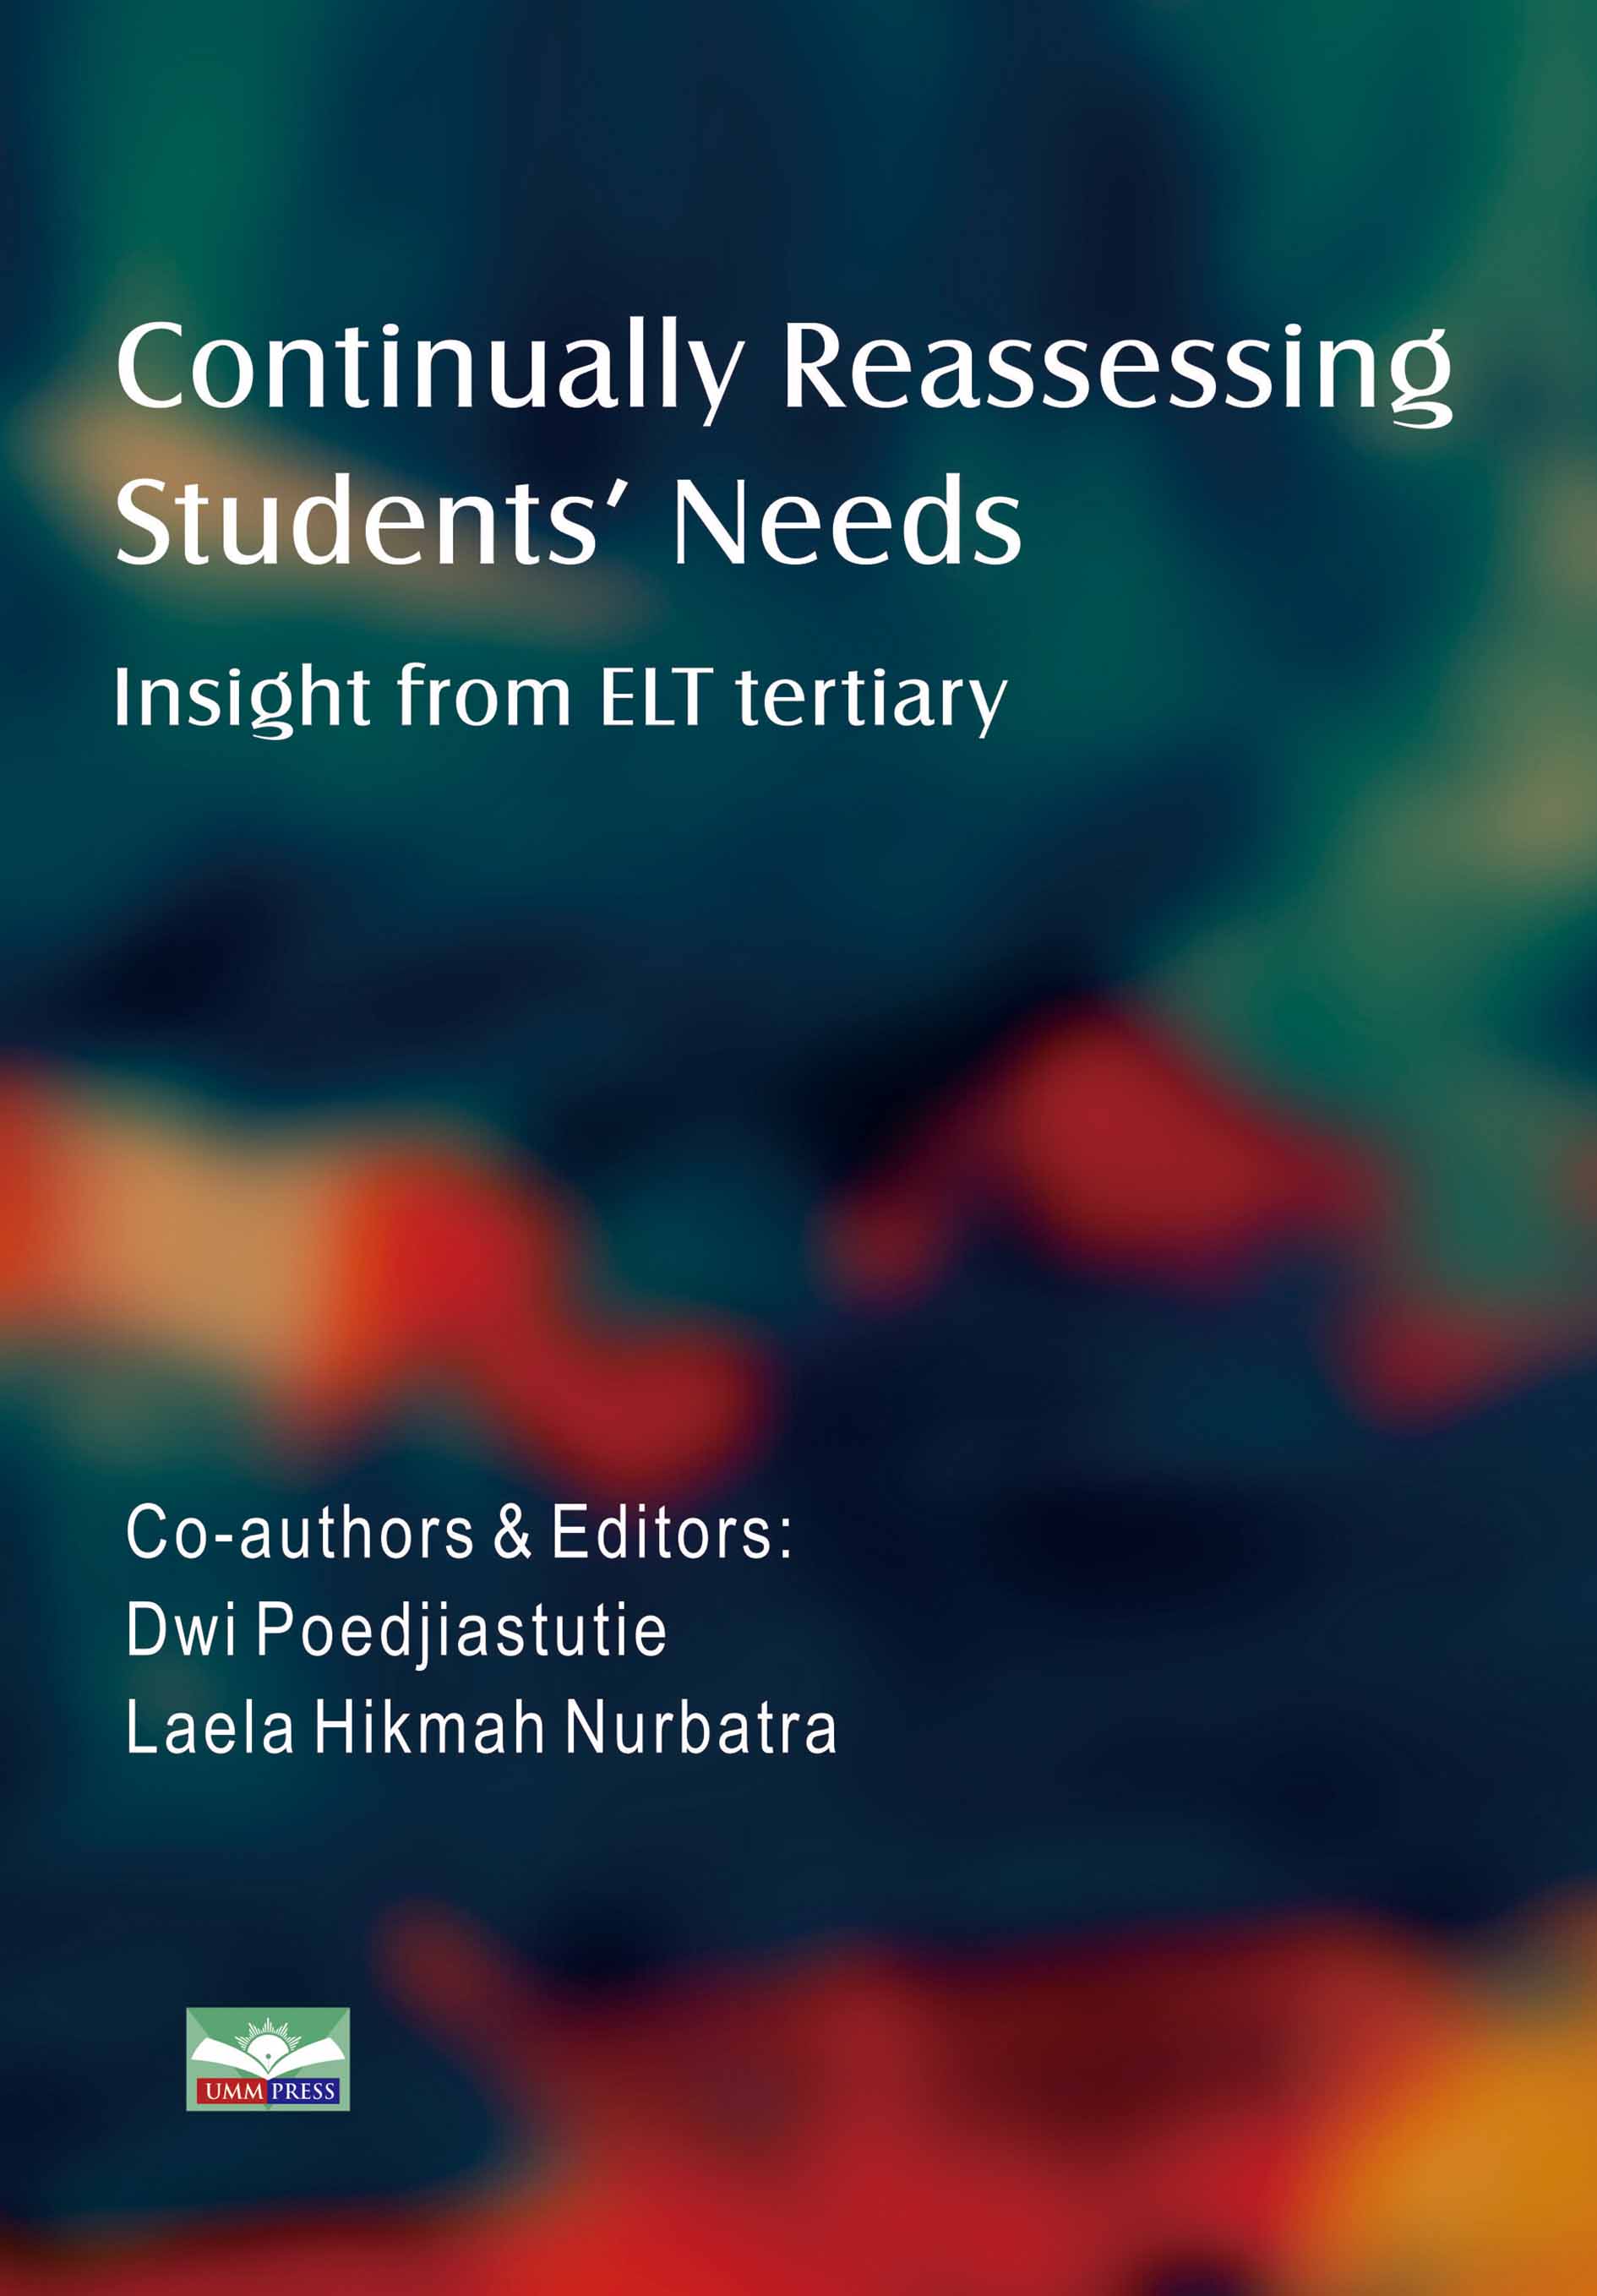 CONTINUALLY REASSESSING STUDENTS’ NEEDS INSIGHT FROM ELT TERTIARY